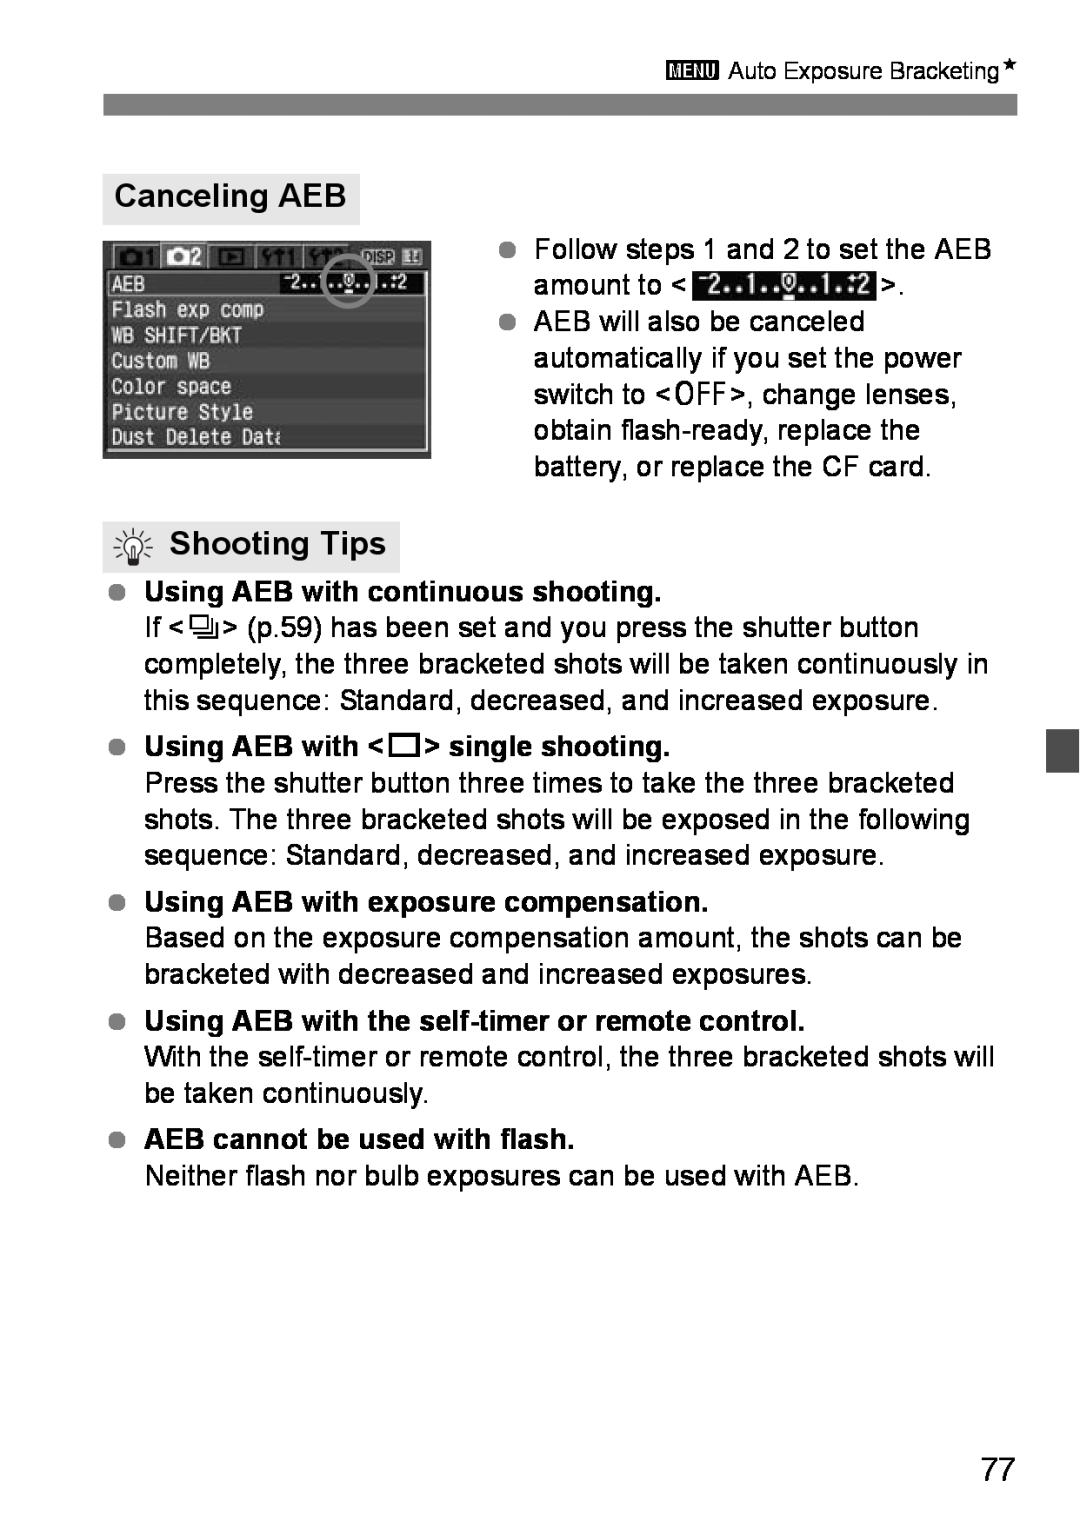 Canon EOS DIGITAL REBEL XTI instruction manual Canceling AEB, Shooting Tips, Using AEB with continuous shooting 